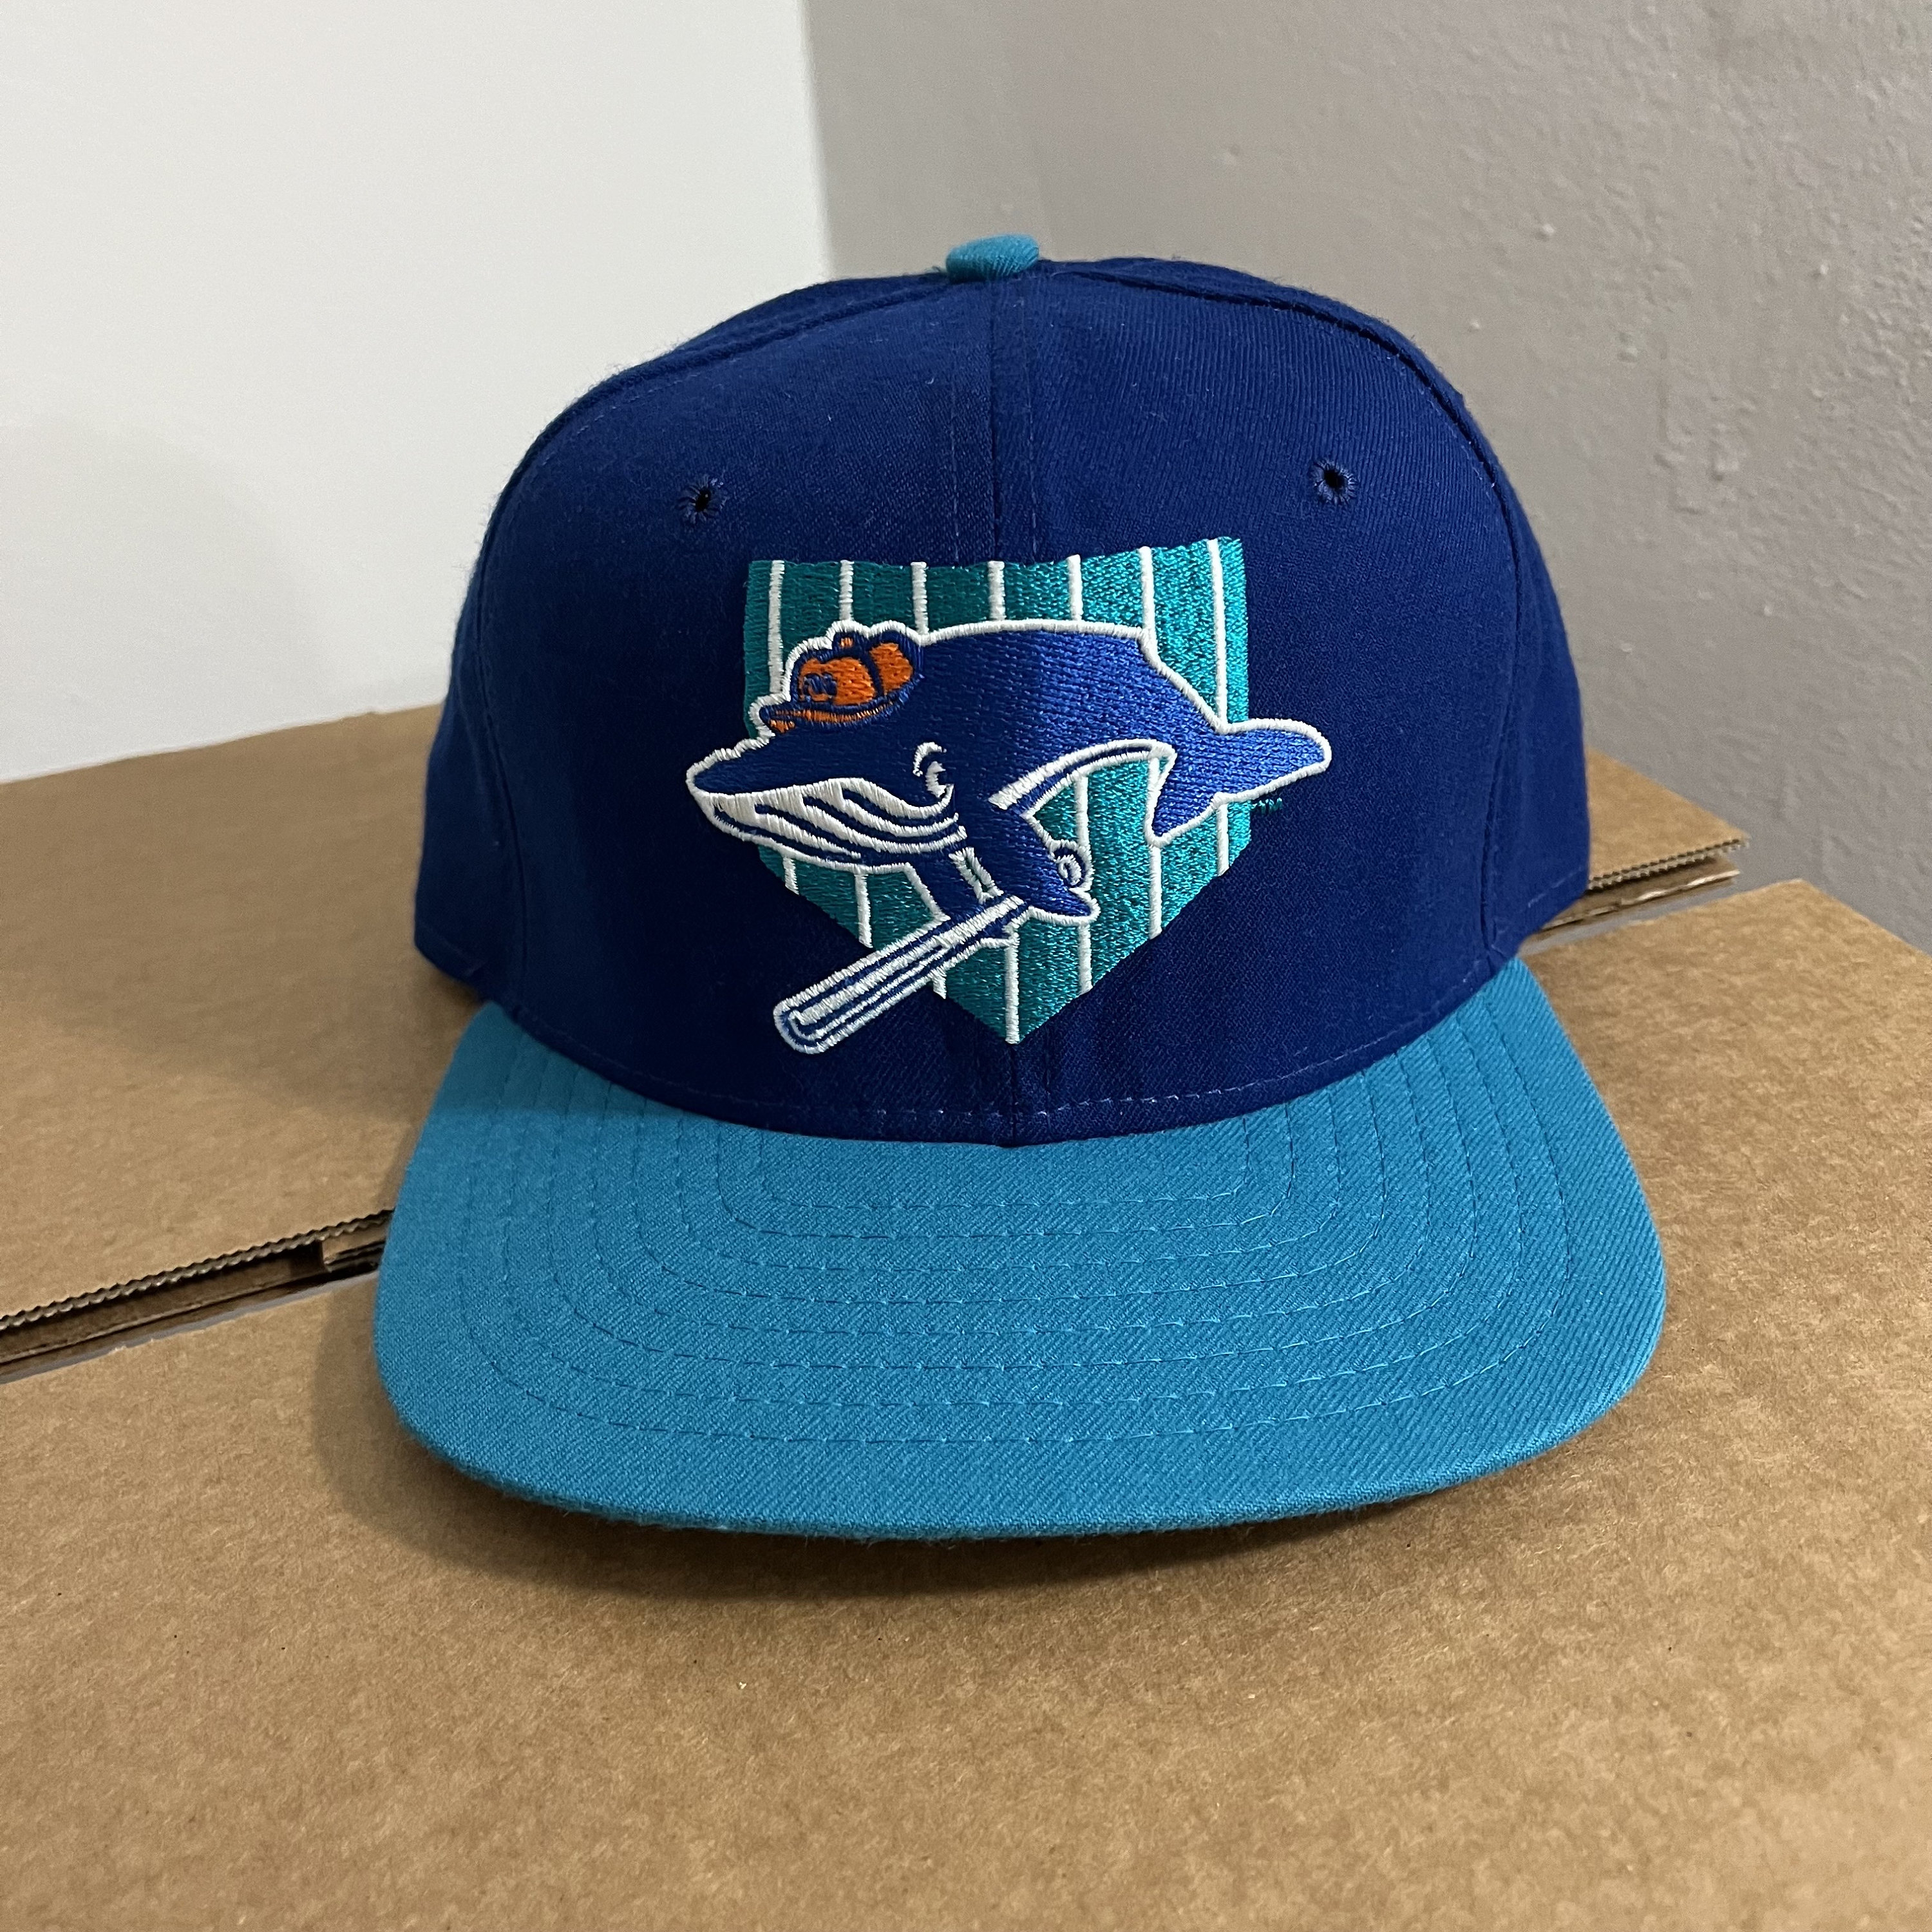 Marlins fans have only one complaint about '90s teal throwbacks